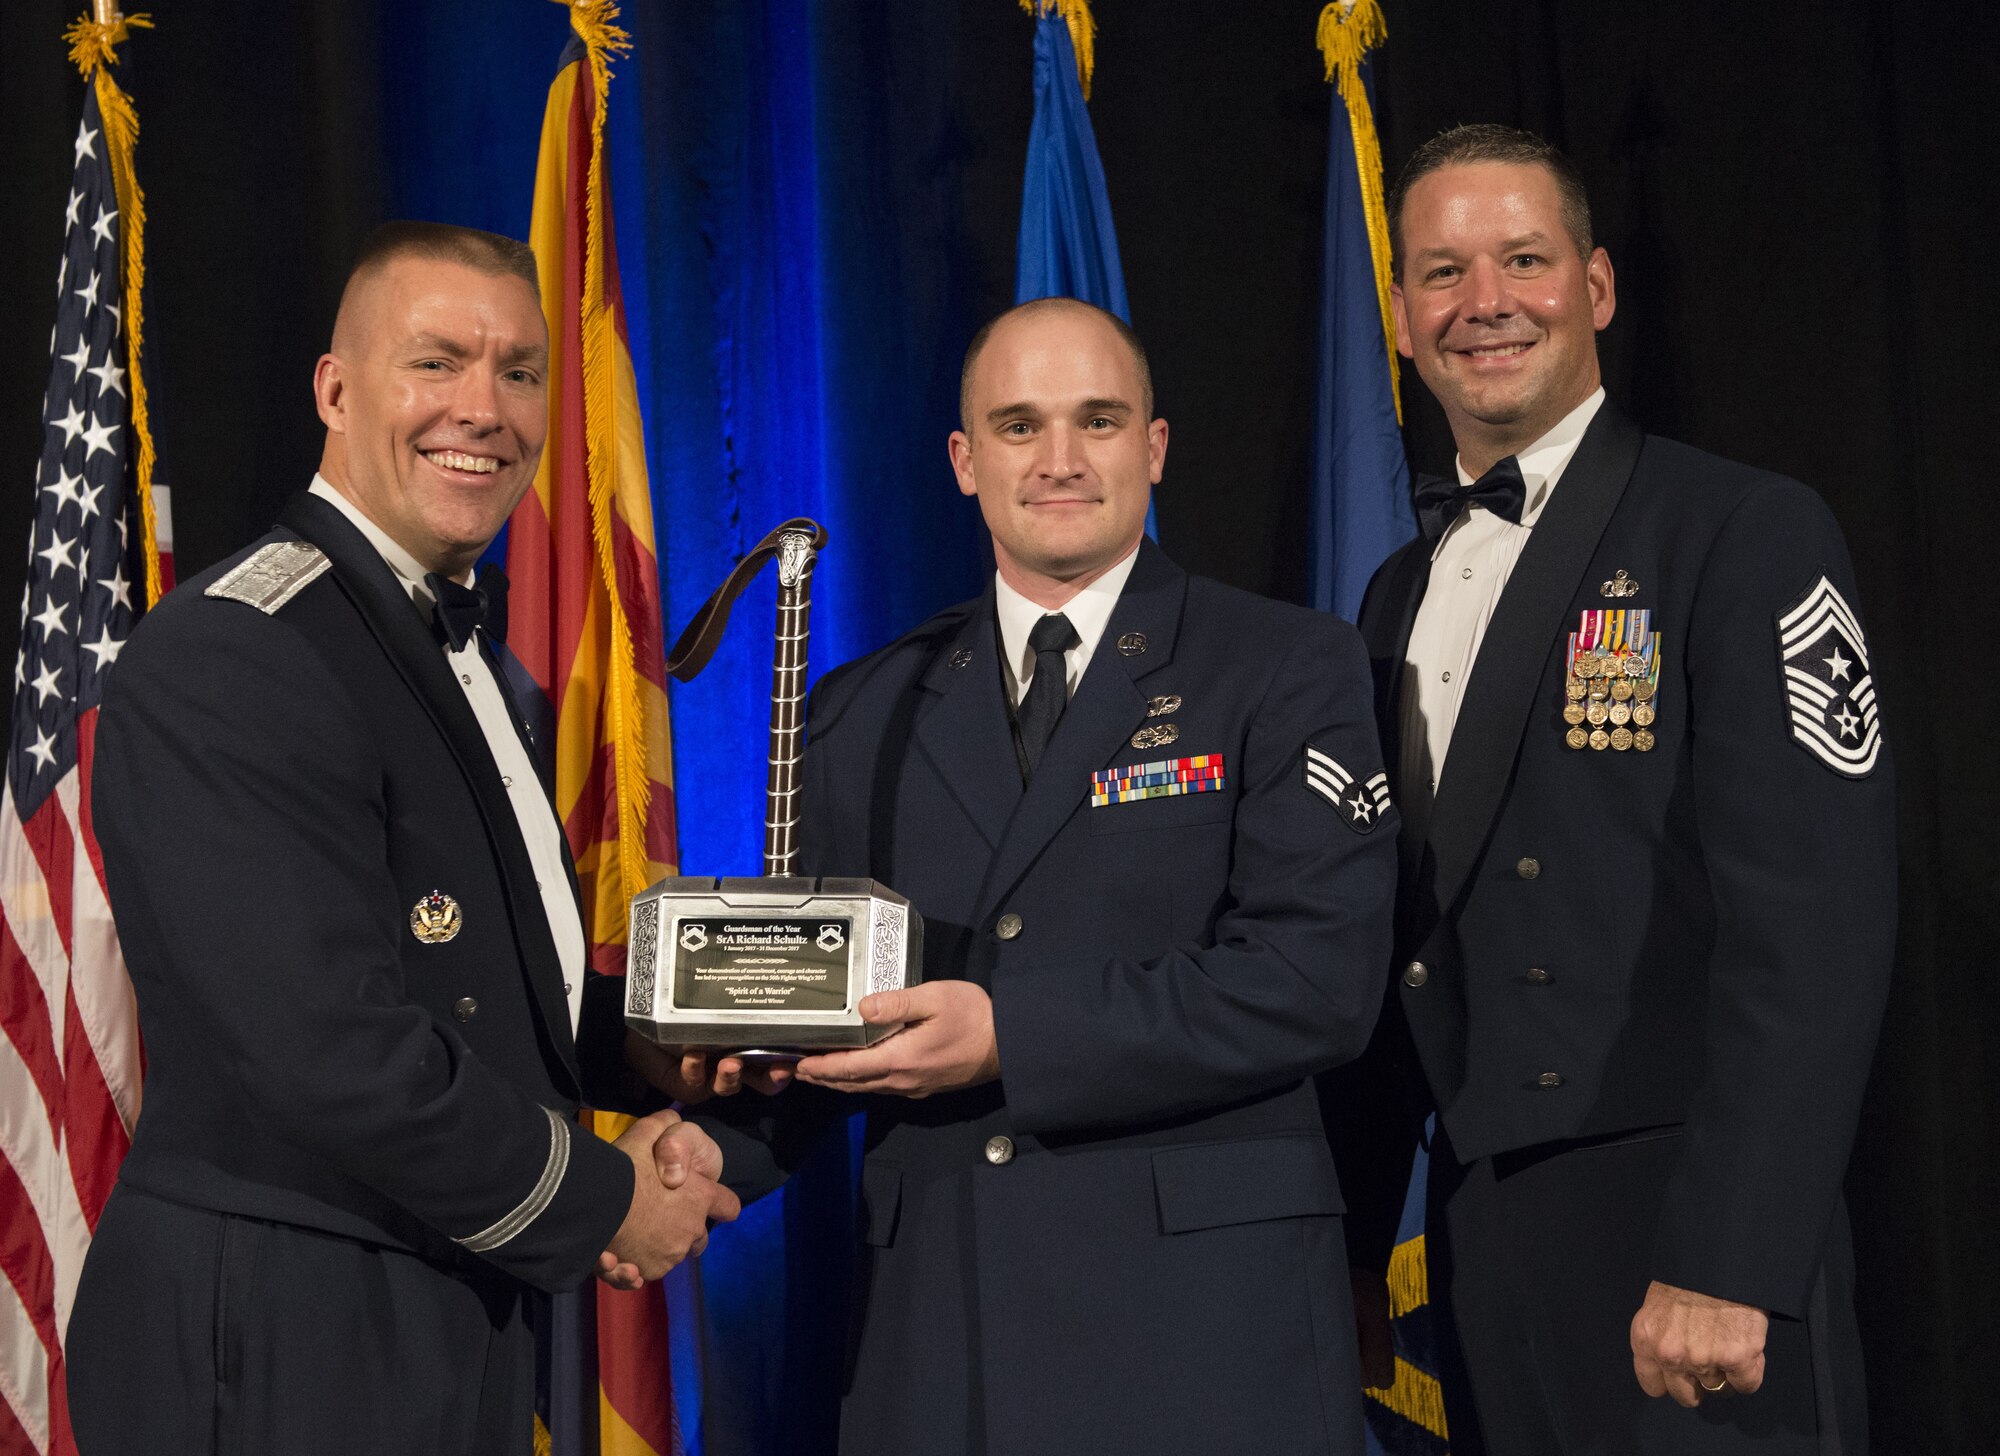 Senior Airman Richard Schultz, 61st Aircraft Maintenance Unit F-35 integrated avionics journeyman, receives the Guardsman of the Year Award from Brig. Gen. Brook Leonard, 56th Fighter Wing commander and Chief Master Sergeant Randy Kwiatkowski, 56th FW command chief, at the 2017 Annual Awards Banquet in Litchfield Park, Ariz., Jan. 20, 2018. The banquet was held to recognize and award the top performing Airmen from Luke Air Force Base. (U.S. Air Force Photo/Airman 1st Class Alexander Cook)